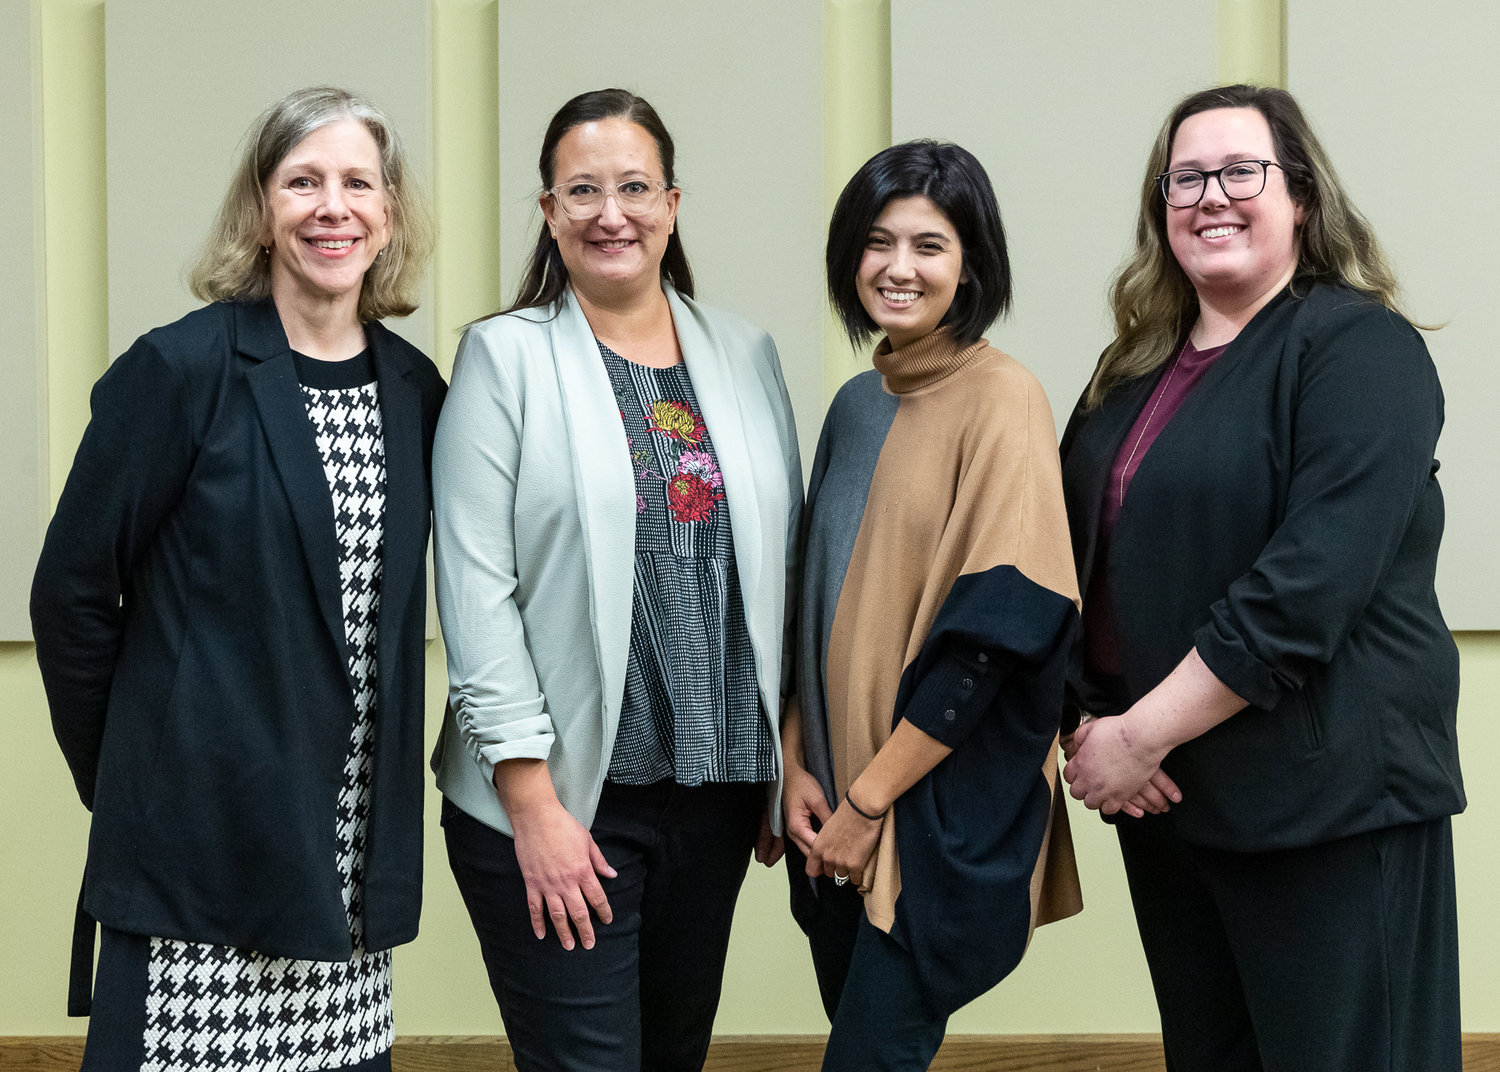 NSC leaders Diane Drollinger, left, and Amy Brooks, right, introduce Springfield office staff members Laura Winstead and Nichole Reynolds, center, during a CFO event last month.